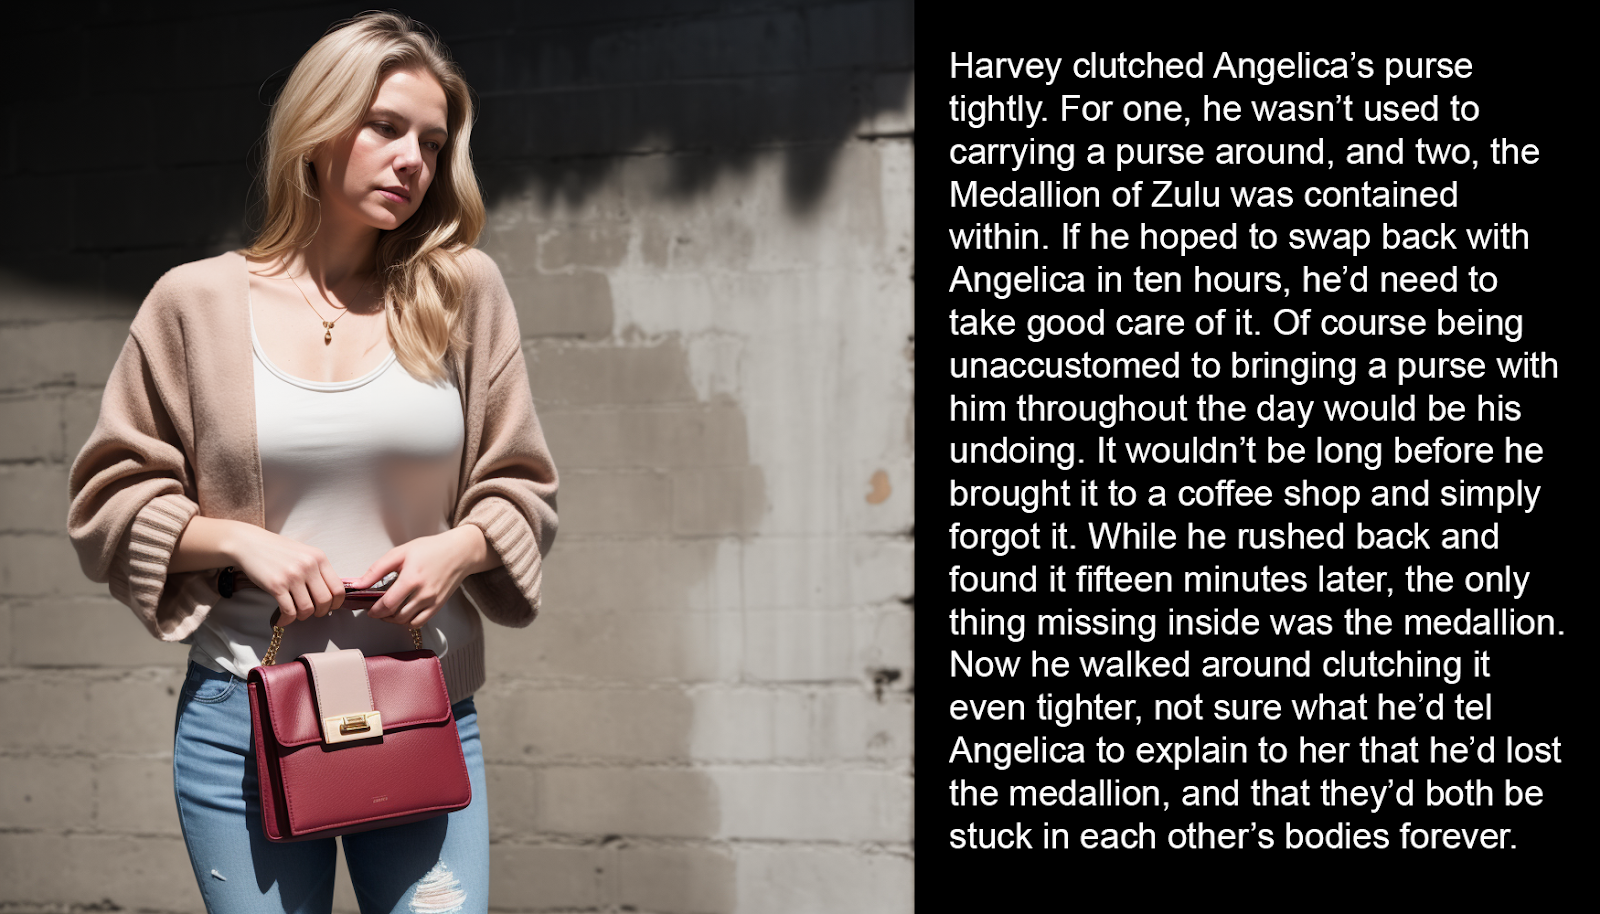 Harvey clutched Angelica’s purse tightly. For one, he wasn’t used to carrying a purse around, and two, the Medallion of Zulu was contained within. If he hoped to swap back with Angelica in ten hours, he’d need to take good care of it. Of course being unaccustomed to bringing a purse with him throughout the day would be his undoing. It wouldn’t be long before he brought it to a coffee shop and simply forgot it. While he rushed back and found it fifteen minutes later, the only thing missing inside was the medallion. Now he walked around clutching it even tighter, not sure what he’d tel Angelica to explain to her that he’d lost the medallion, and that they’d both be stuck in each other’s bodies forever.